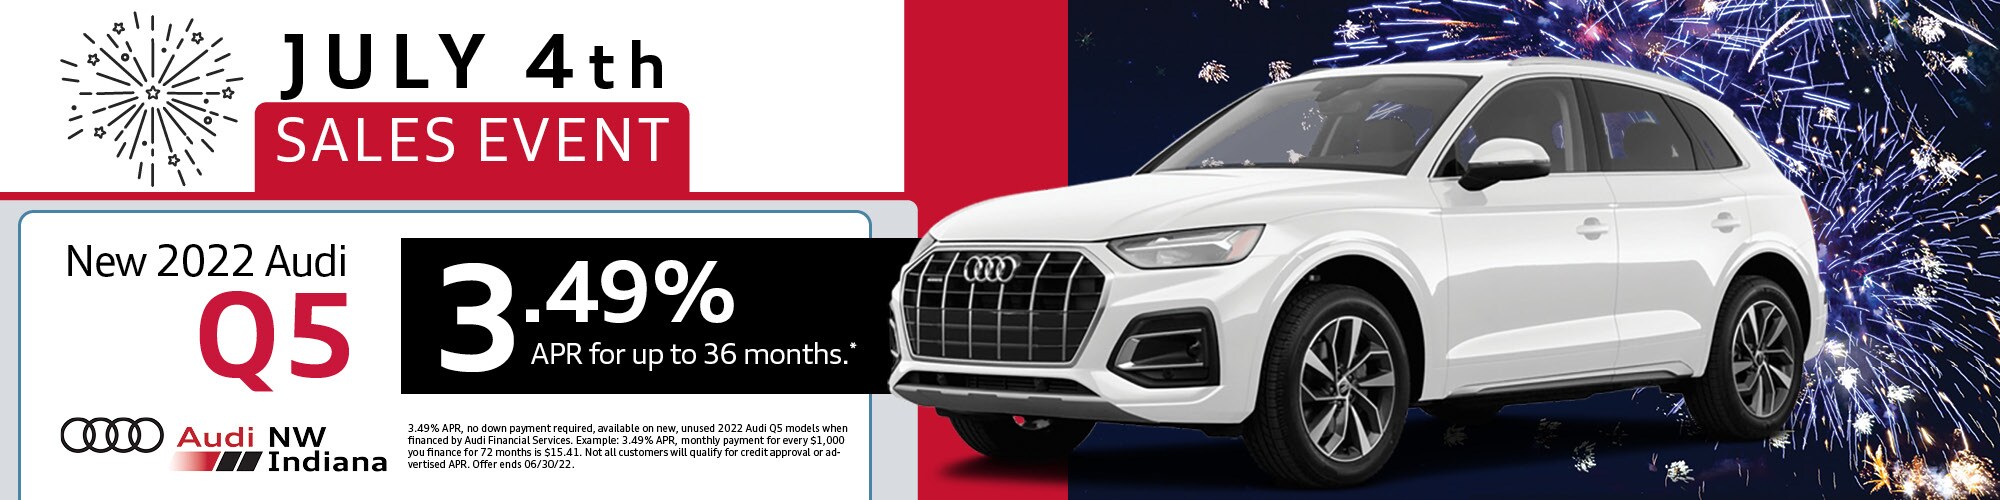 New 2022 Audi Q5 for 3.49% APR for up to 36 months